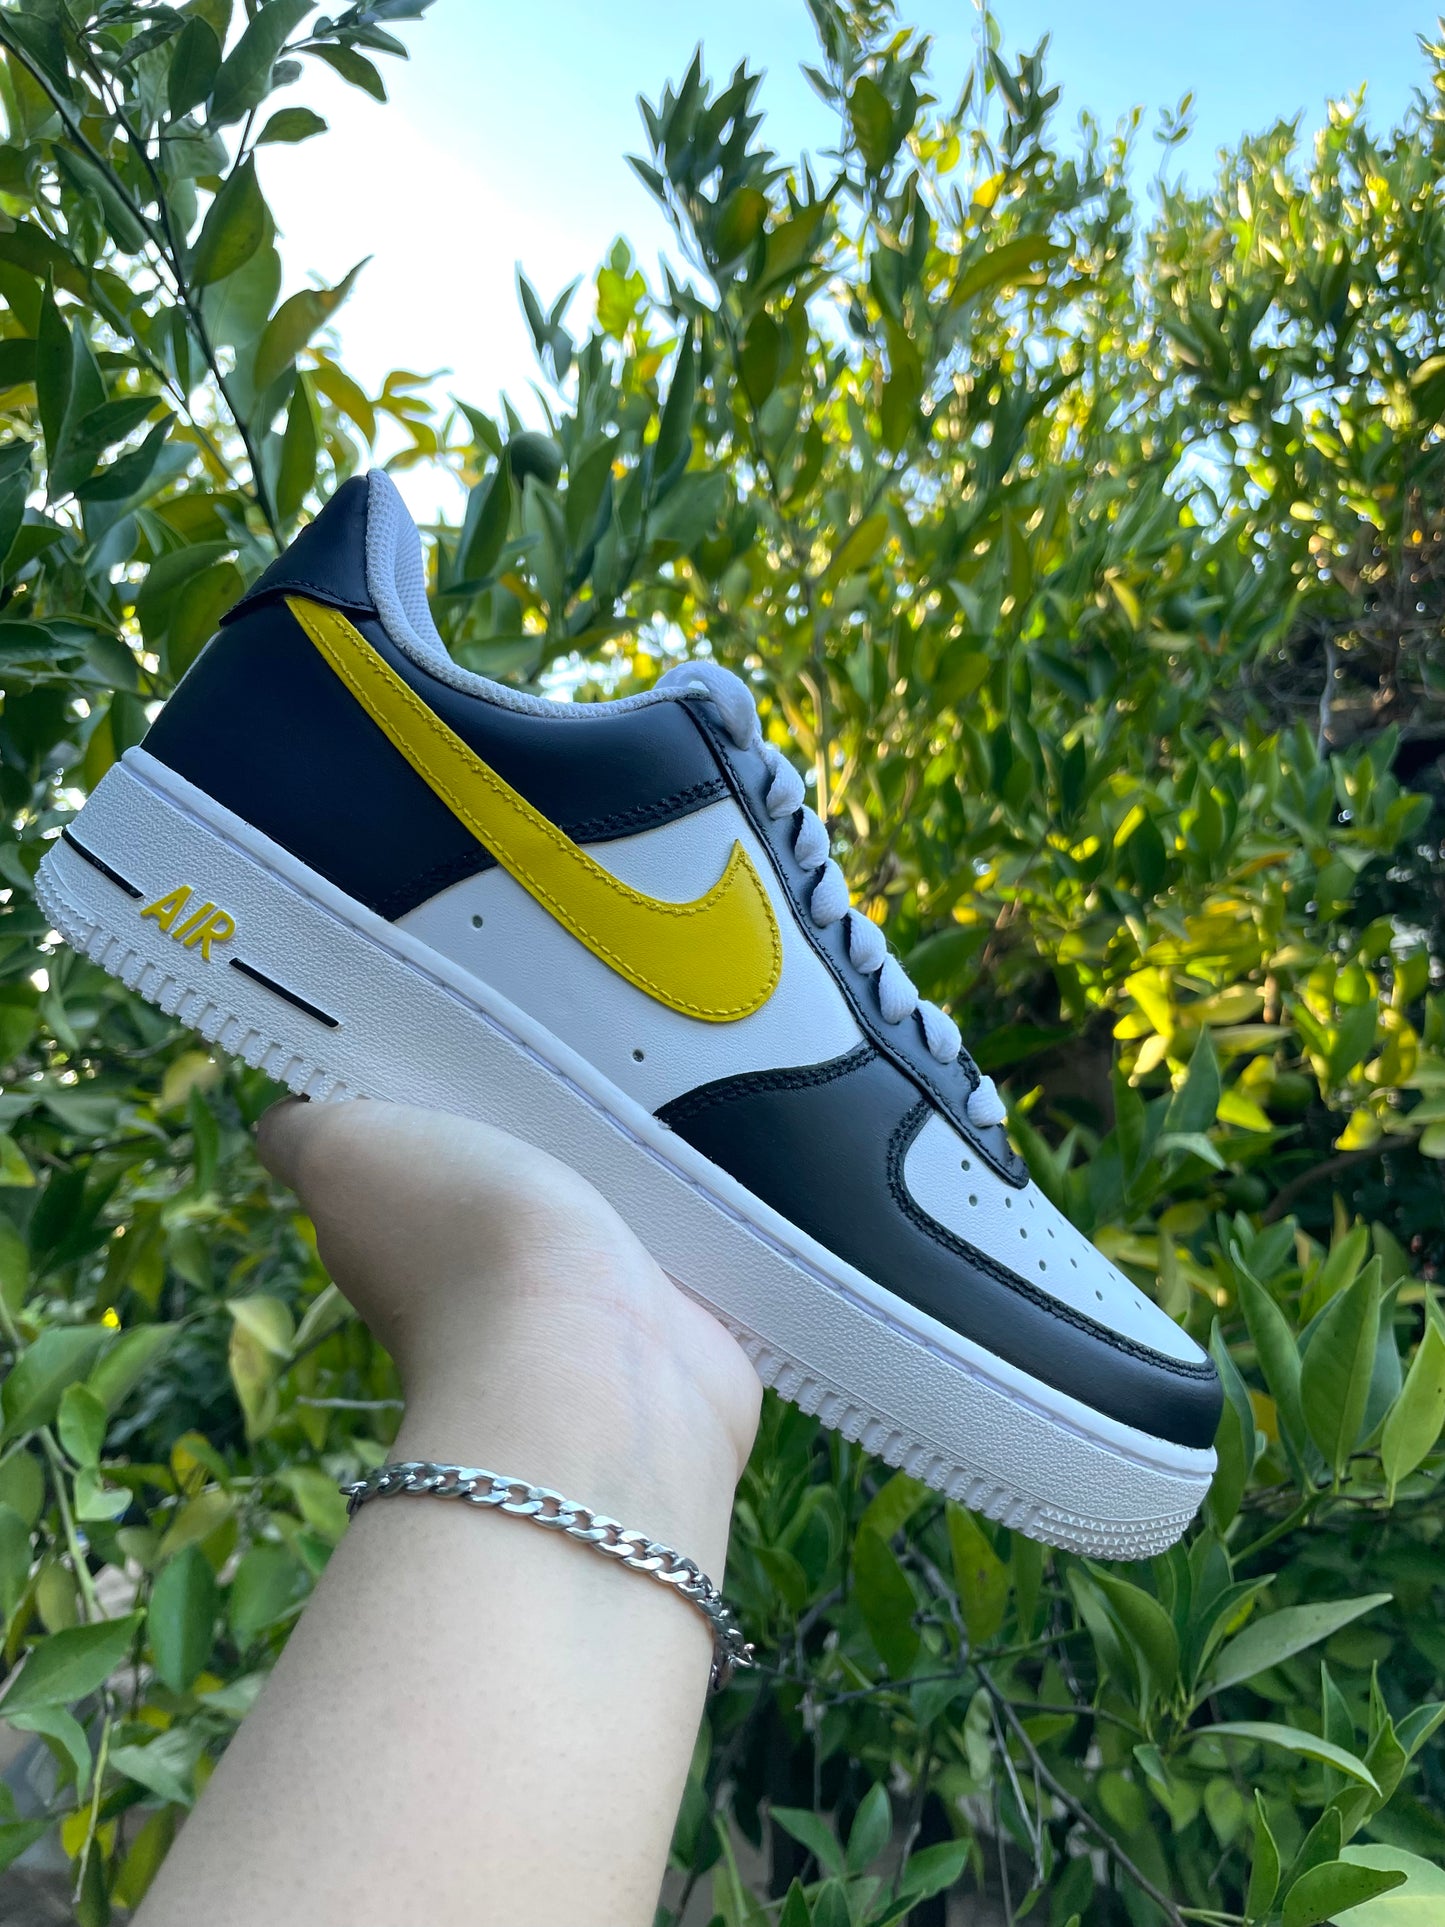 Nike Air Force 1 Low Custom Yellow Swoosh AF1 Unisex Shoes for Men Women